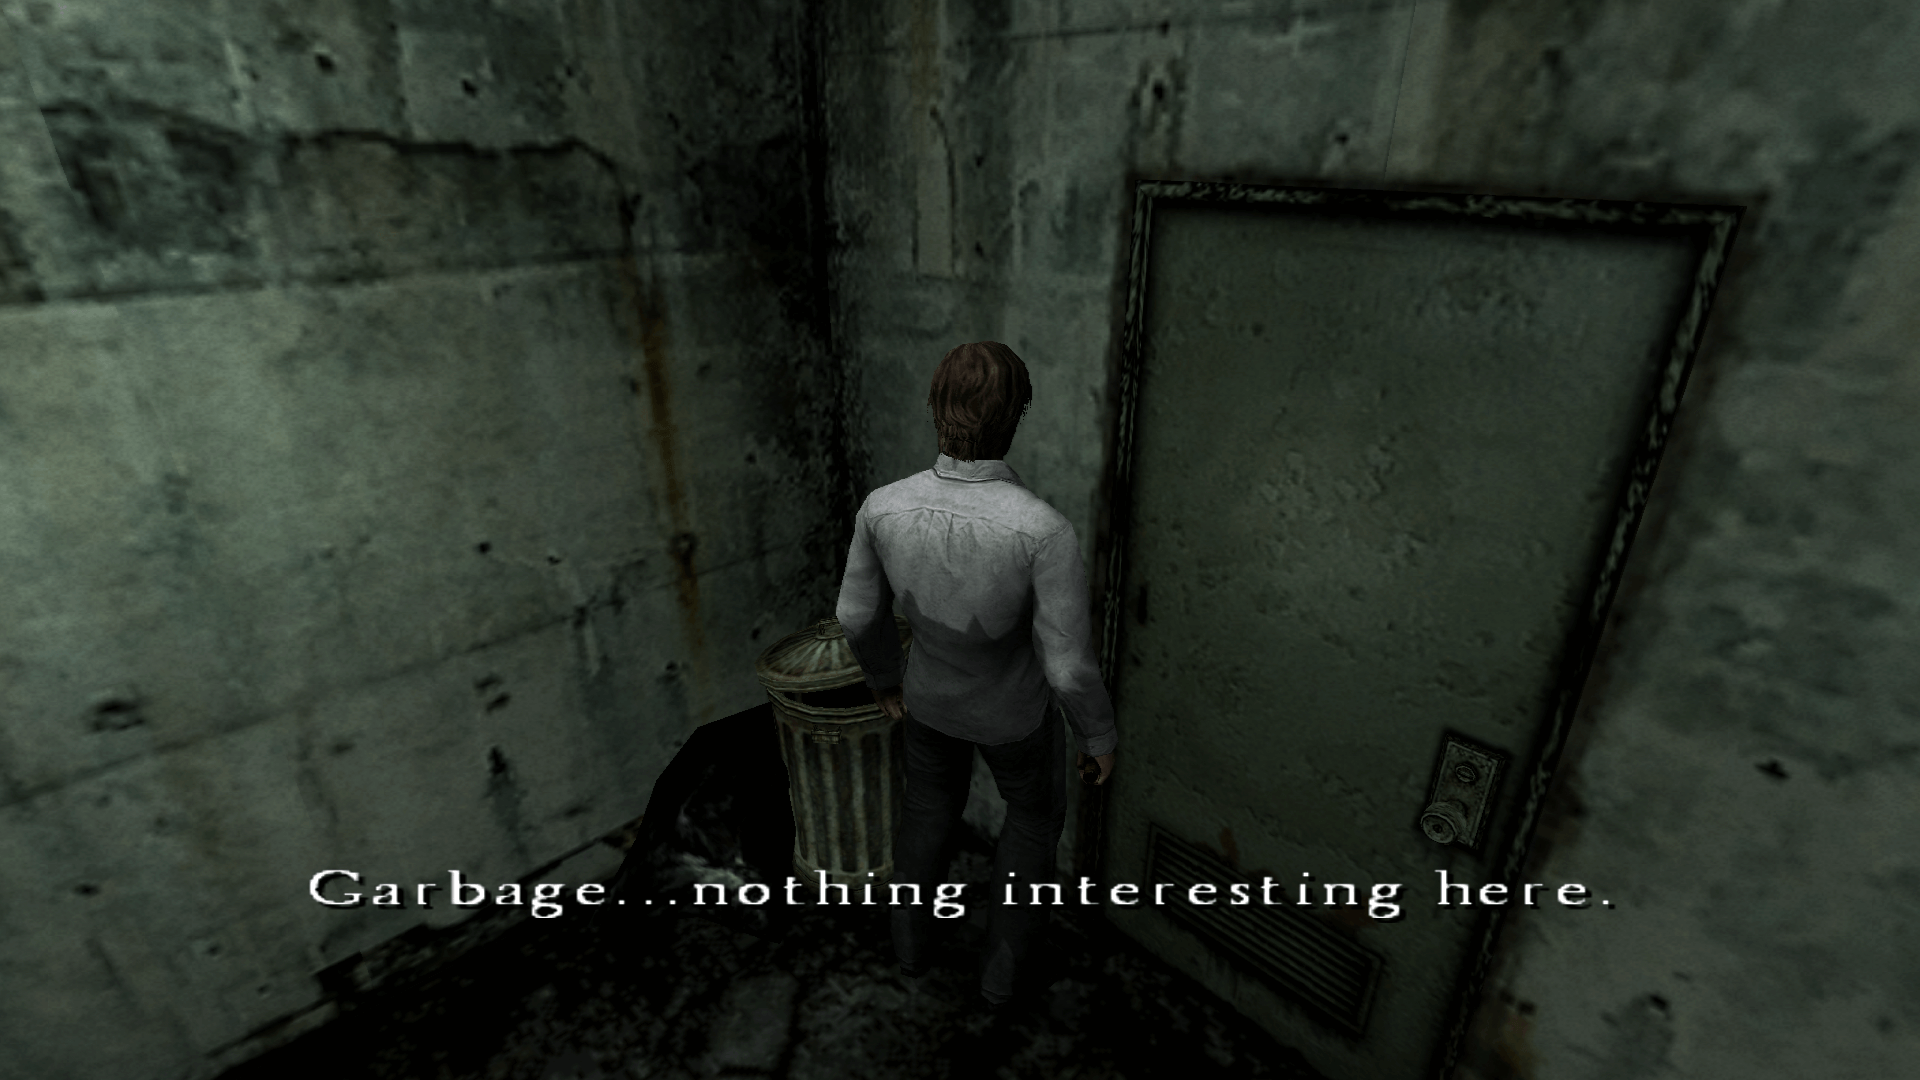 Henry Townsend of Silent Hill 4 comments that there is 'Garbage, nothing interesting here'